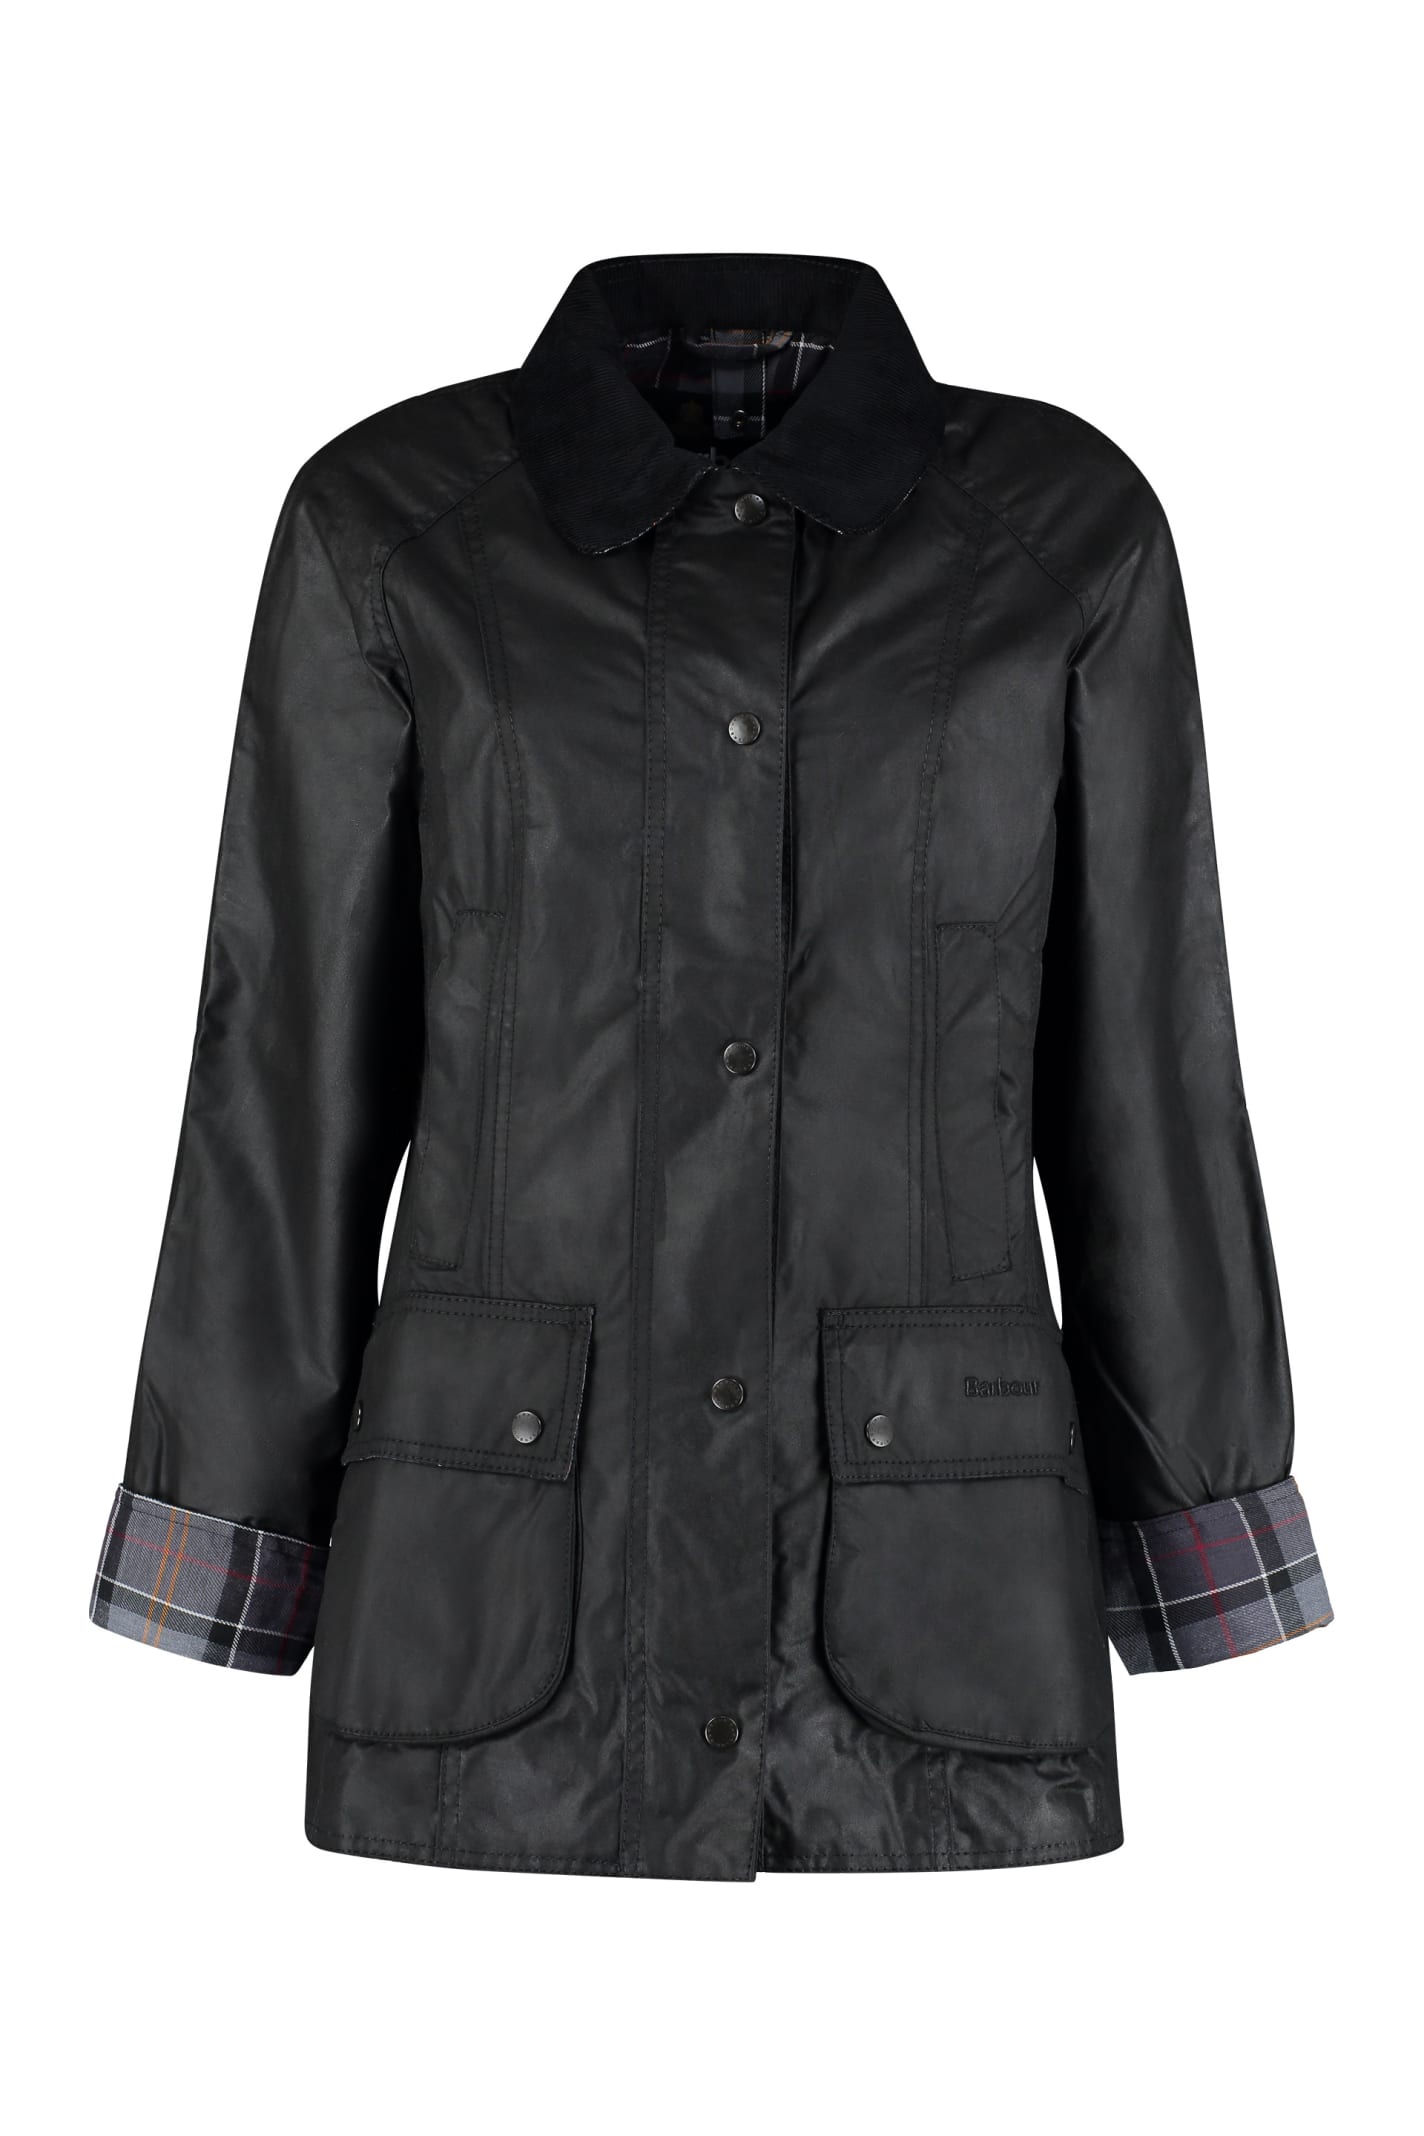 Barbour Beadnell Coated Cotton Jacket